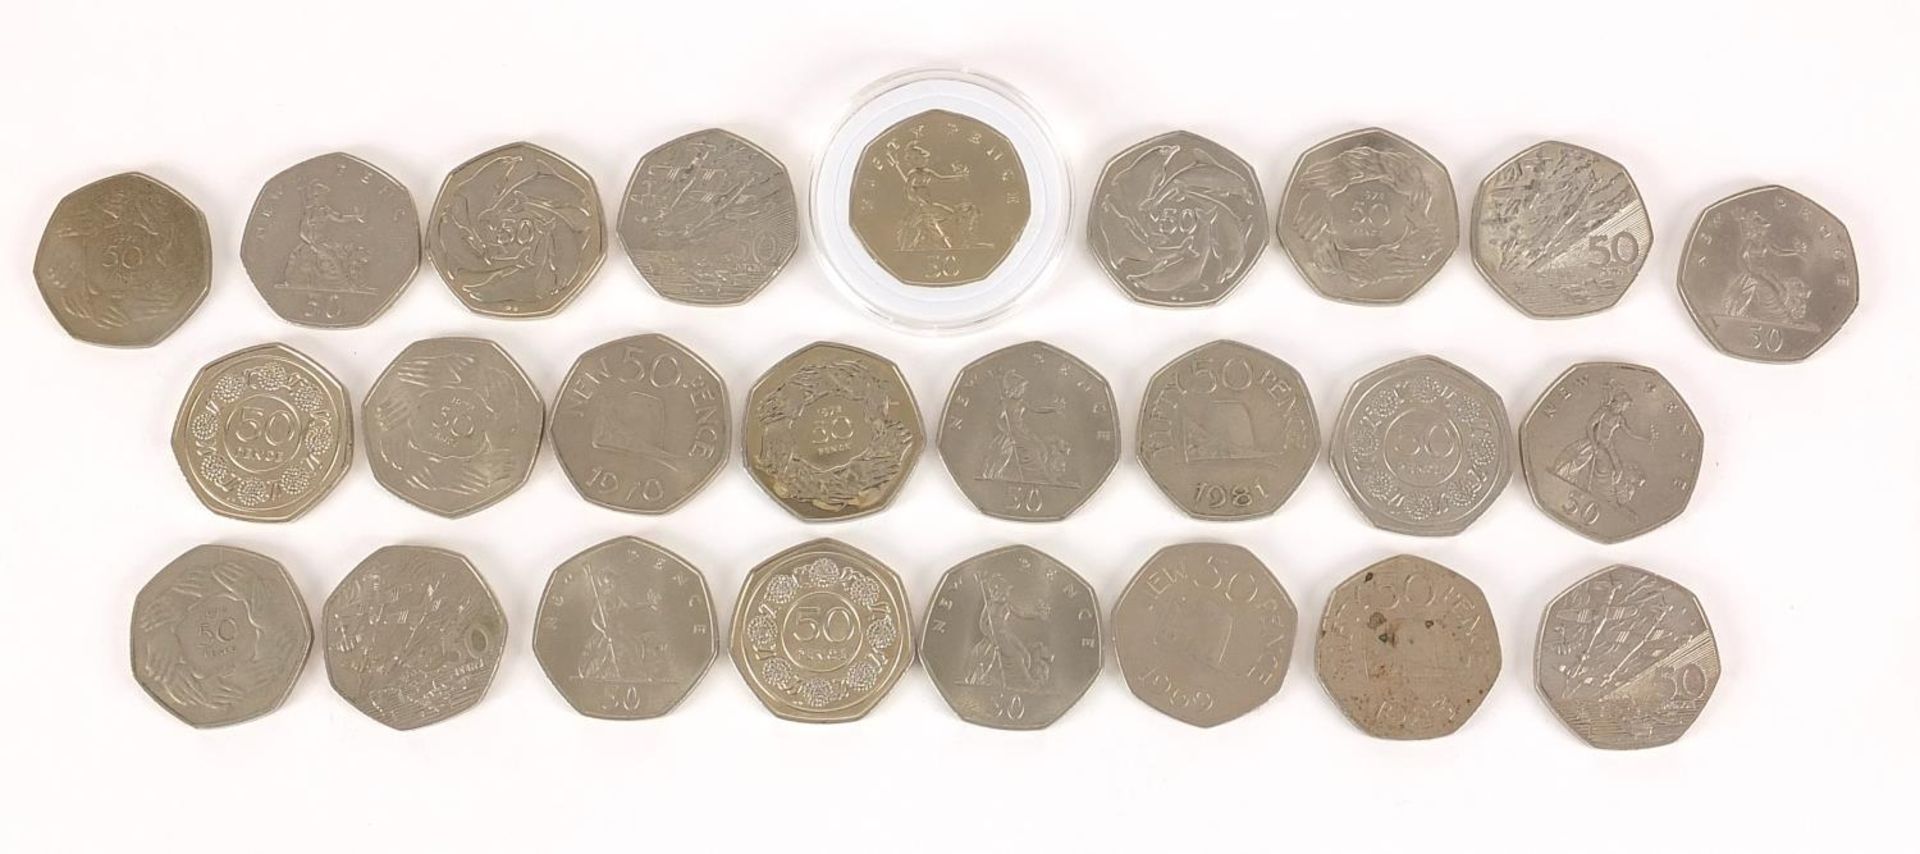 Selection of fifty pence pieces, various designs